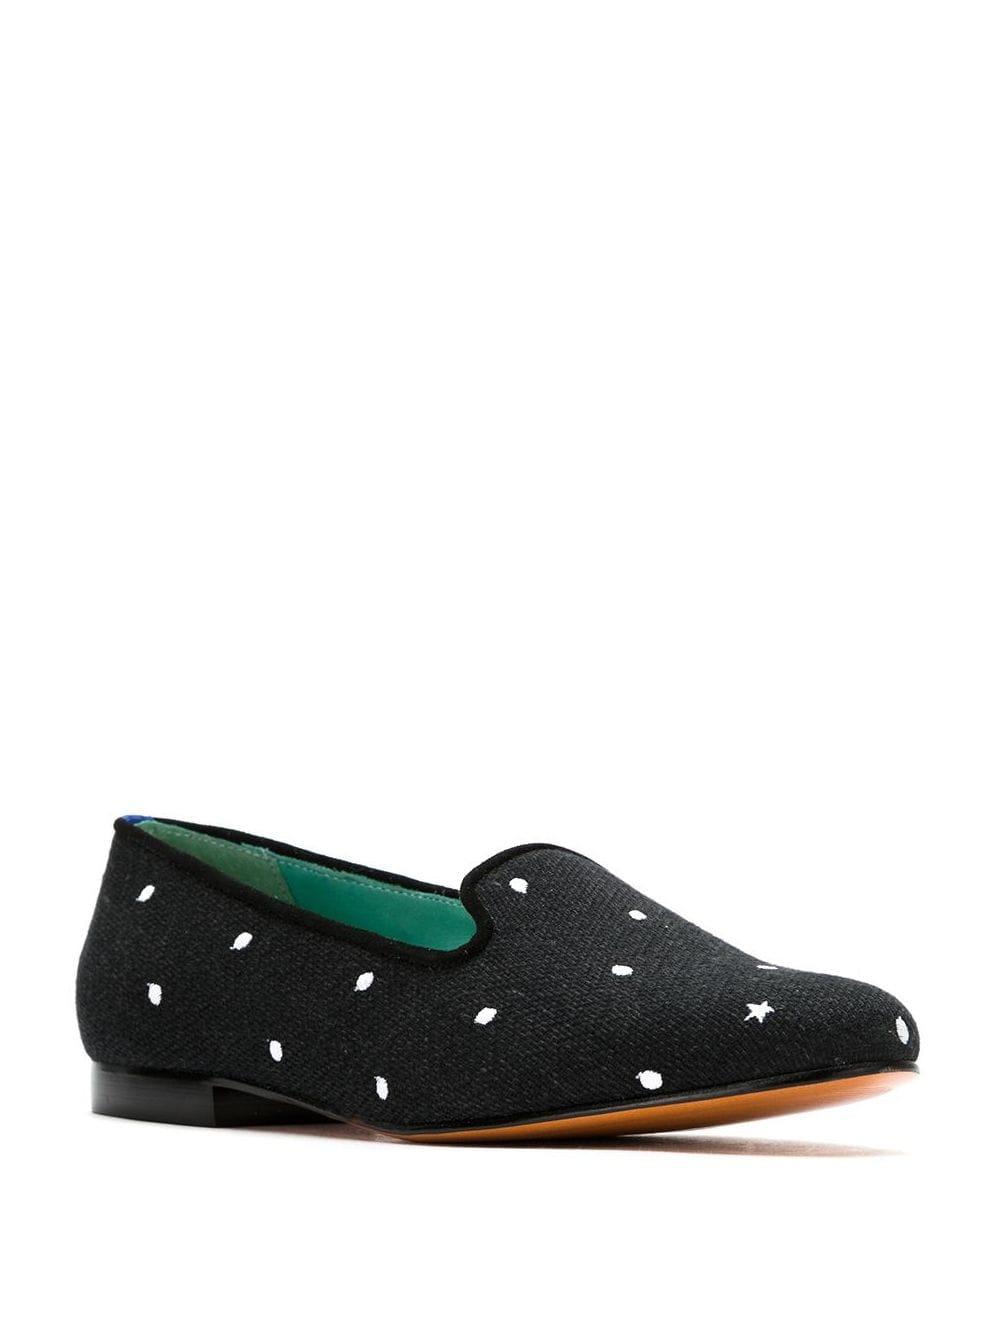 Blue Bird Shoes Petit Pois Loafers in Black - Lyst